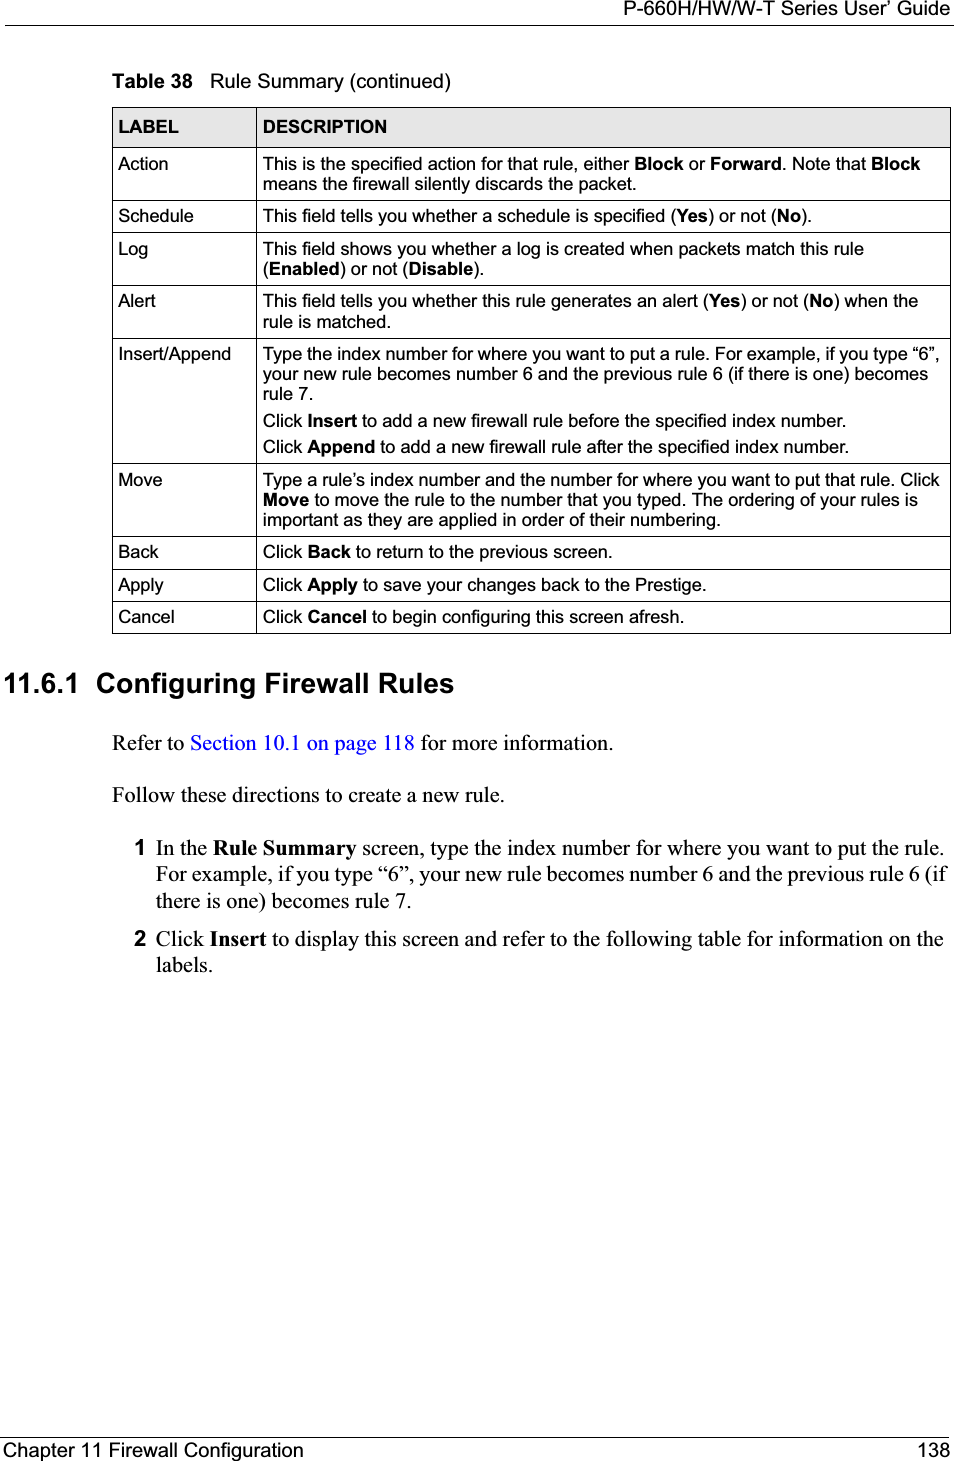 P-660H/HW/W-T Series User’ GuideChapter 11 Firewall Configuration 13811.6.1  Configuring Firewall Rules   Refer to Section 10.1 on page 118 for more information. Follow these directions to create a new rule.1In the Rule Summary screen, type the index number for where you want to put the rule. For example, if you type “6”, your new rule becomes number 6 and the previous rule 6 (if there is one) becomes rule 7. 2Click Insert to display this screen and refer to the following table for information on the labels.Action This is the specified action for that rule, either Block or Forward. Note that Blockmeans the firewall silently discards the packet.Schedule This field tells you whether a schedule is specified (Yes) or not (No).Log This field shows you whether a log is created when packets match this rule (Enabled) or not (Disable).Alert This field tells you whether this rule generates an alert (Yes) or not (No) when the rule is matched.Insert/Append Type the index number for where you want to put a rule. For example, if you type “6”, your new rule becomes number 6 and the previous rule 6 (if there is one) becomes rule 7. Click Insert to add a new firewall rule before the specified index number. Click Append to add a new firewall rule after the specified index number. Move Type a rule’s index number and the number for where you want to put that rule. Click Move to move the rule to the number that you typed. The ordering of your rules is important as they are applied in order of their numbering.Back Click Back to return to the previous screen. Apply Click Apply to save your changes back to the Prestige.Cancel Click Cancel to begin configuring this screen afresh.Table 38   Rule Summary (continued)LABEL DESCRIPTION